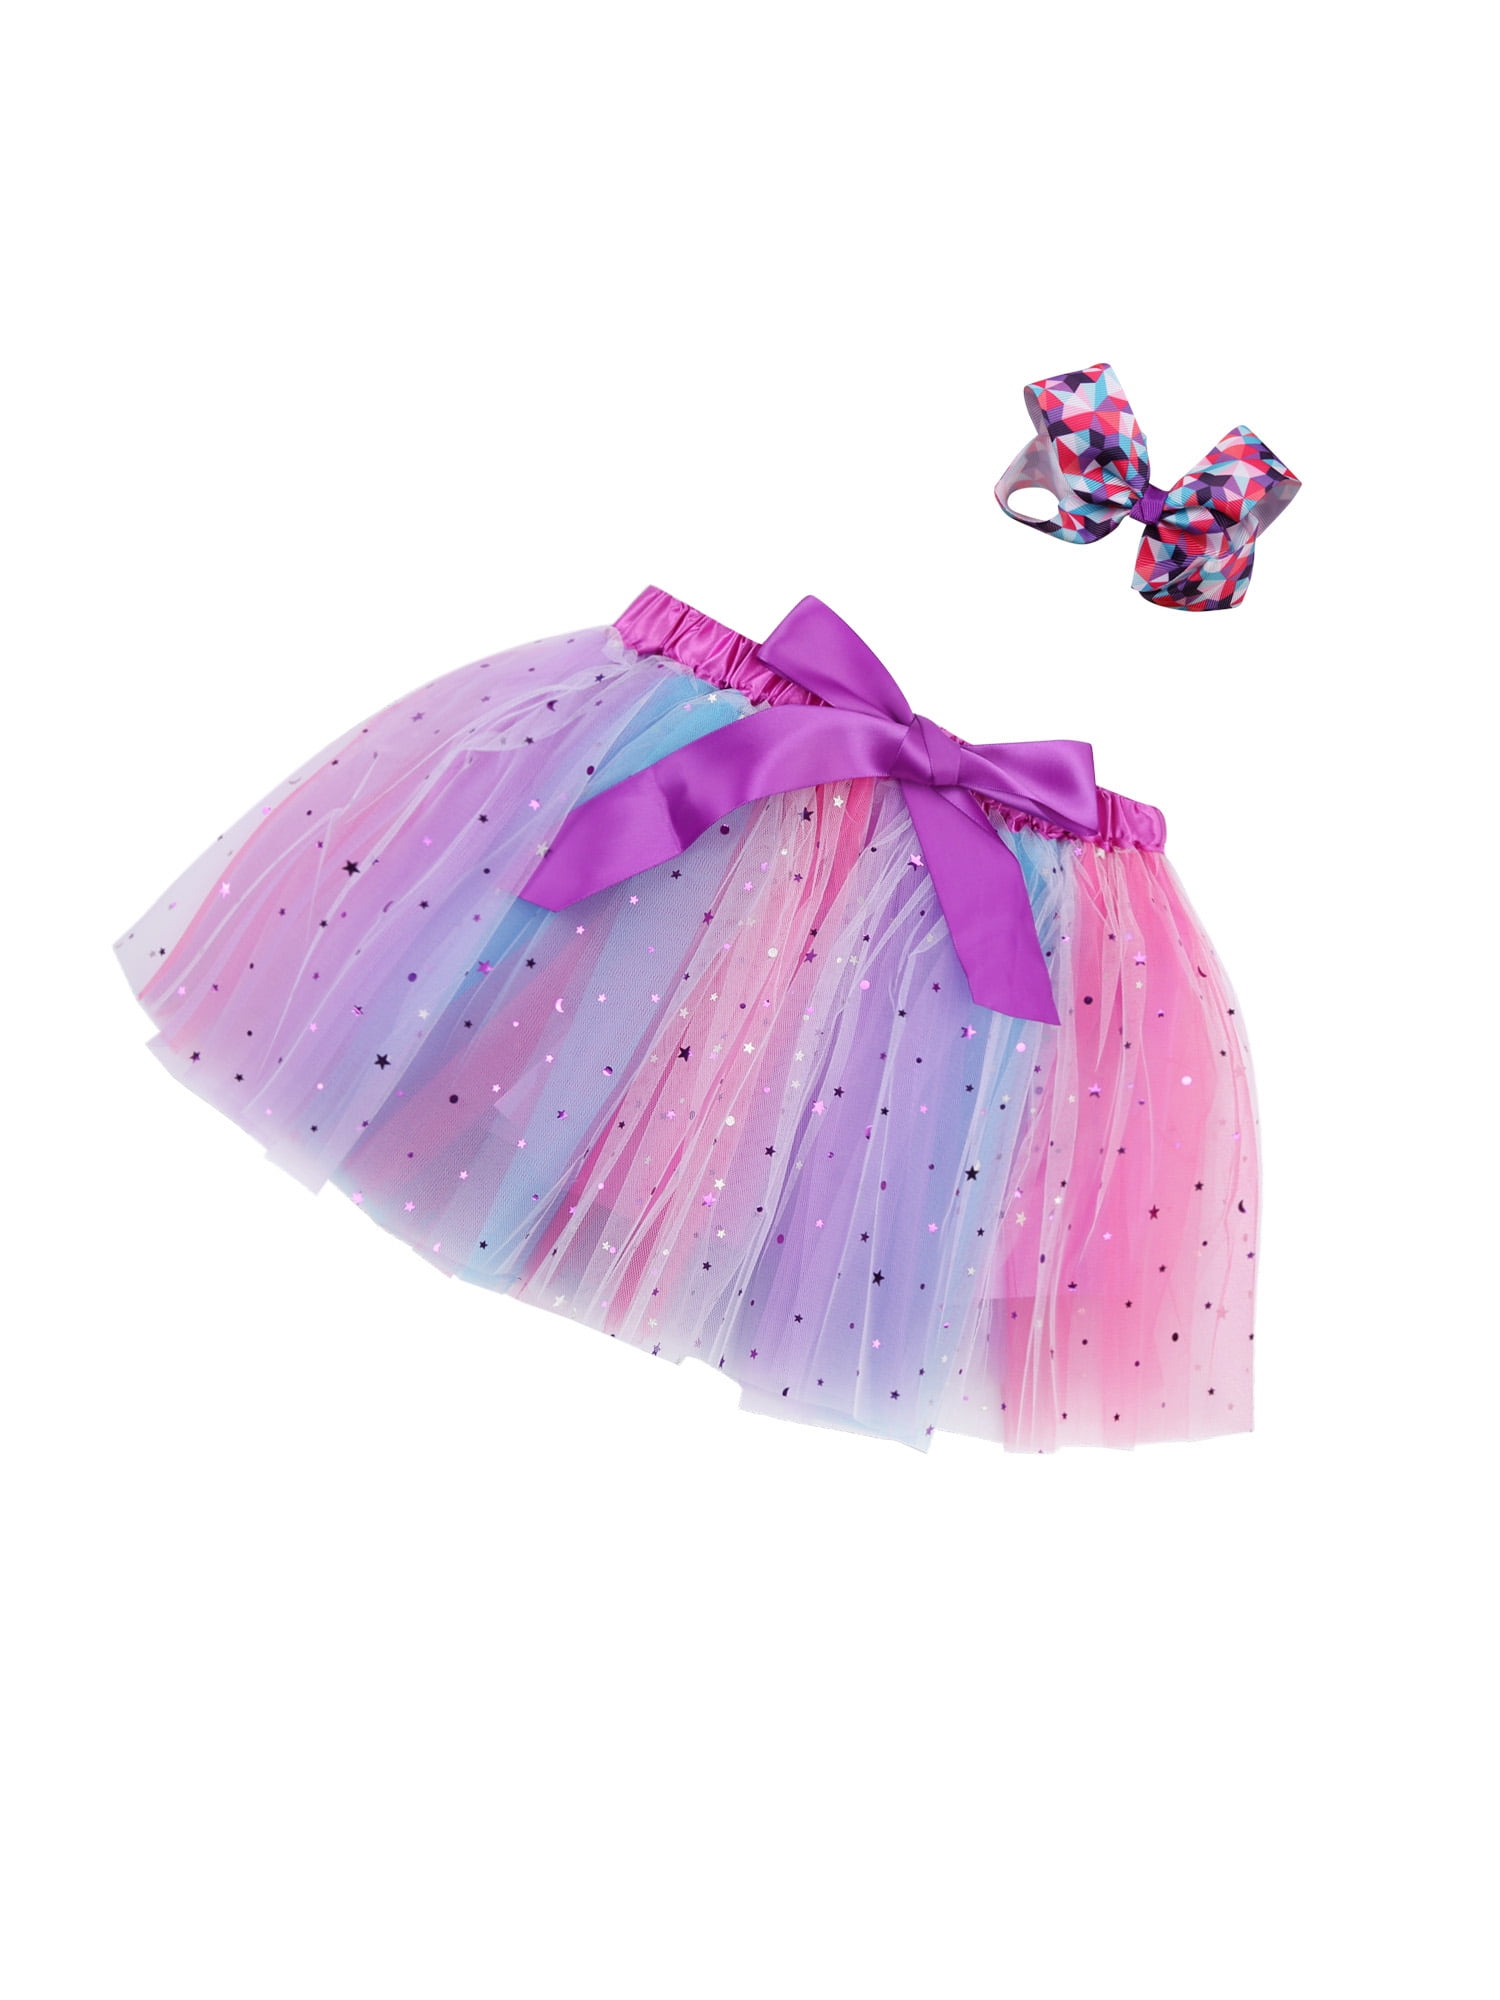 Rainbow Tulle Tutu Table Skirt Double Layer Satin Willows With Glossy  Organza,birthday Party Decorations for Unicorn and Mermaid Parties 